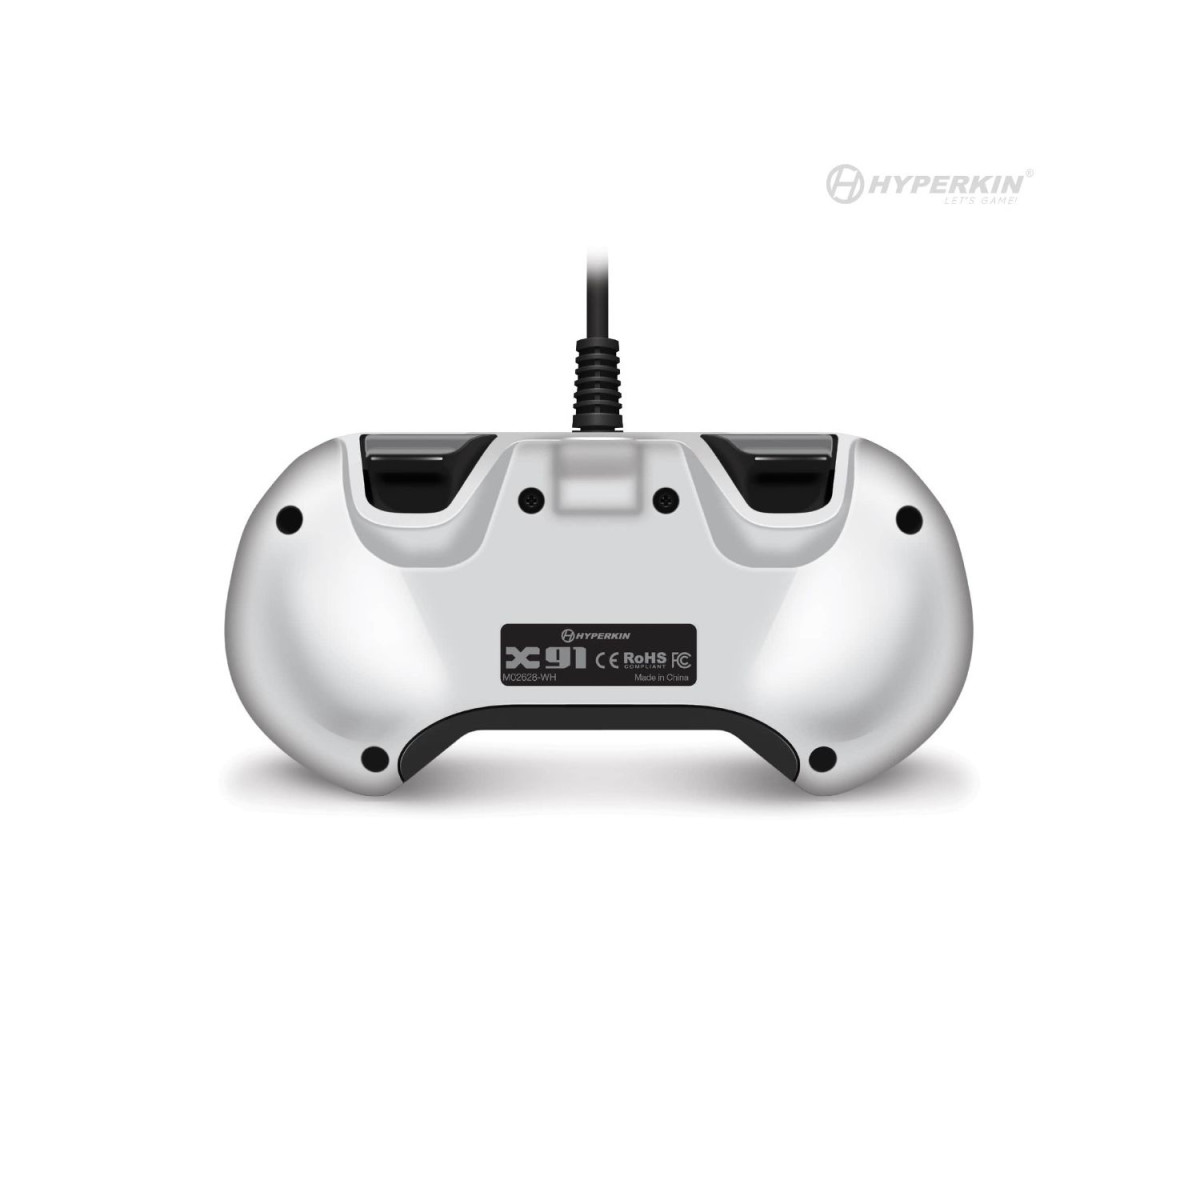 X91 Wired Controller - White